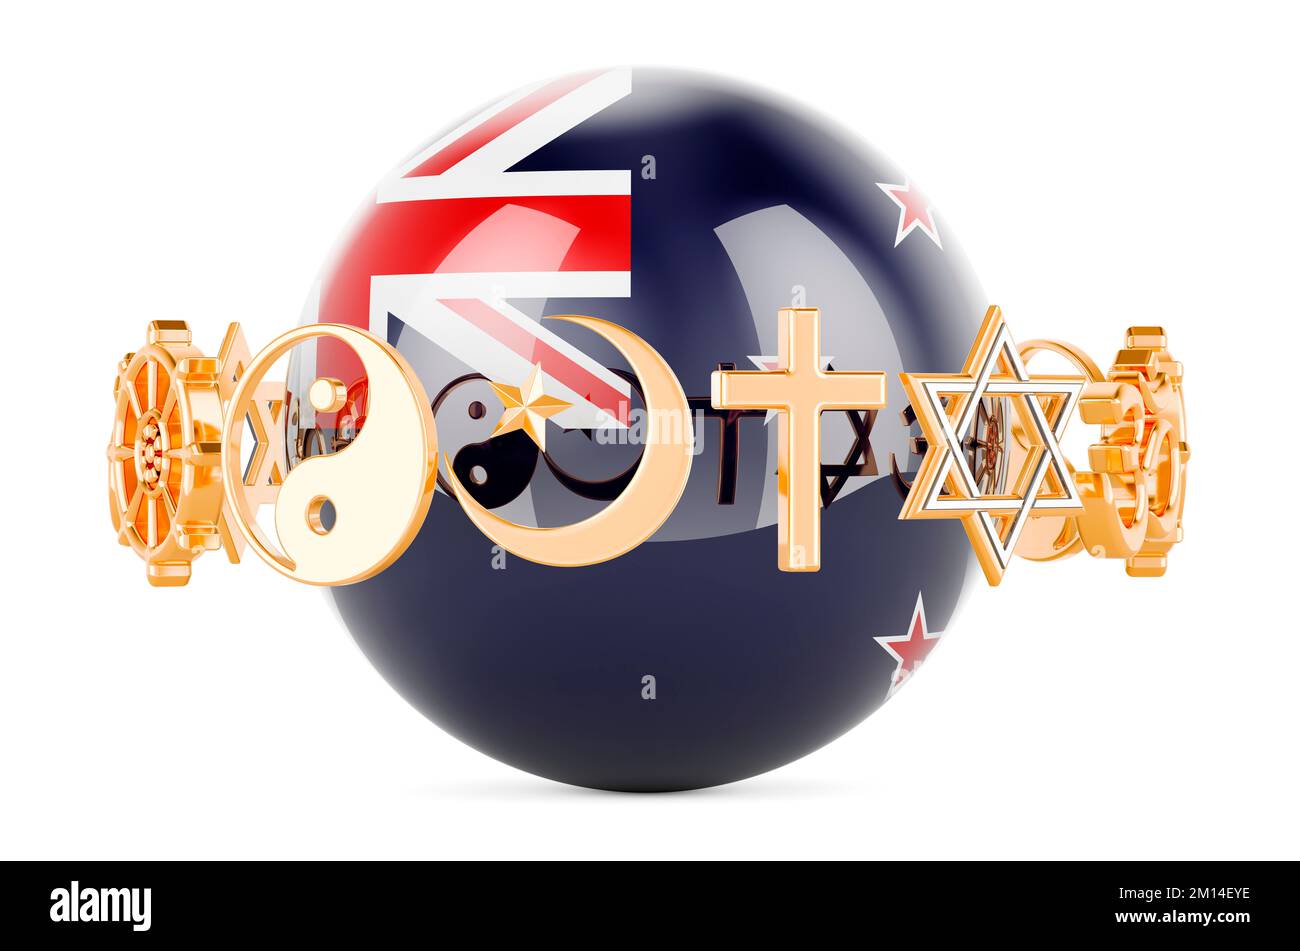 New Zealand flag painted on sphere with religions symbols around, 3D rendering isolated on white background Stock Photo